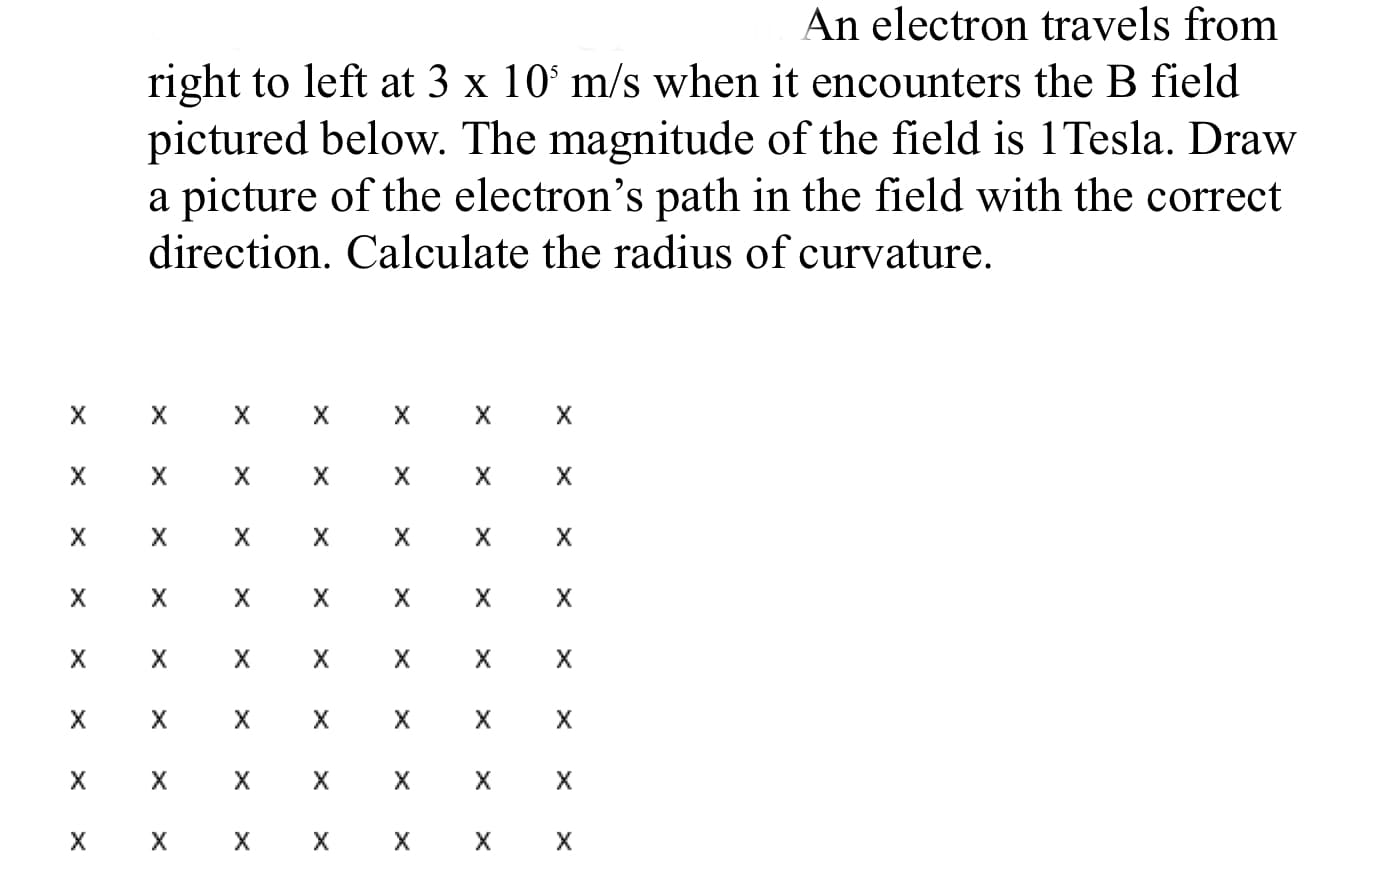 An electron travels from
right to left at 3 x 10° m/s when it encounters the B field
pictured below. The magnitude of the field is 1Tesla. Draw
a picture of the electron's path in the field with the correct
direction. Calculate the radius of curvature.
х х
